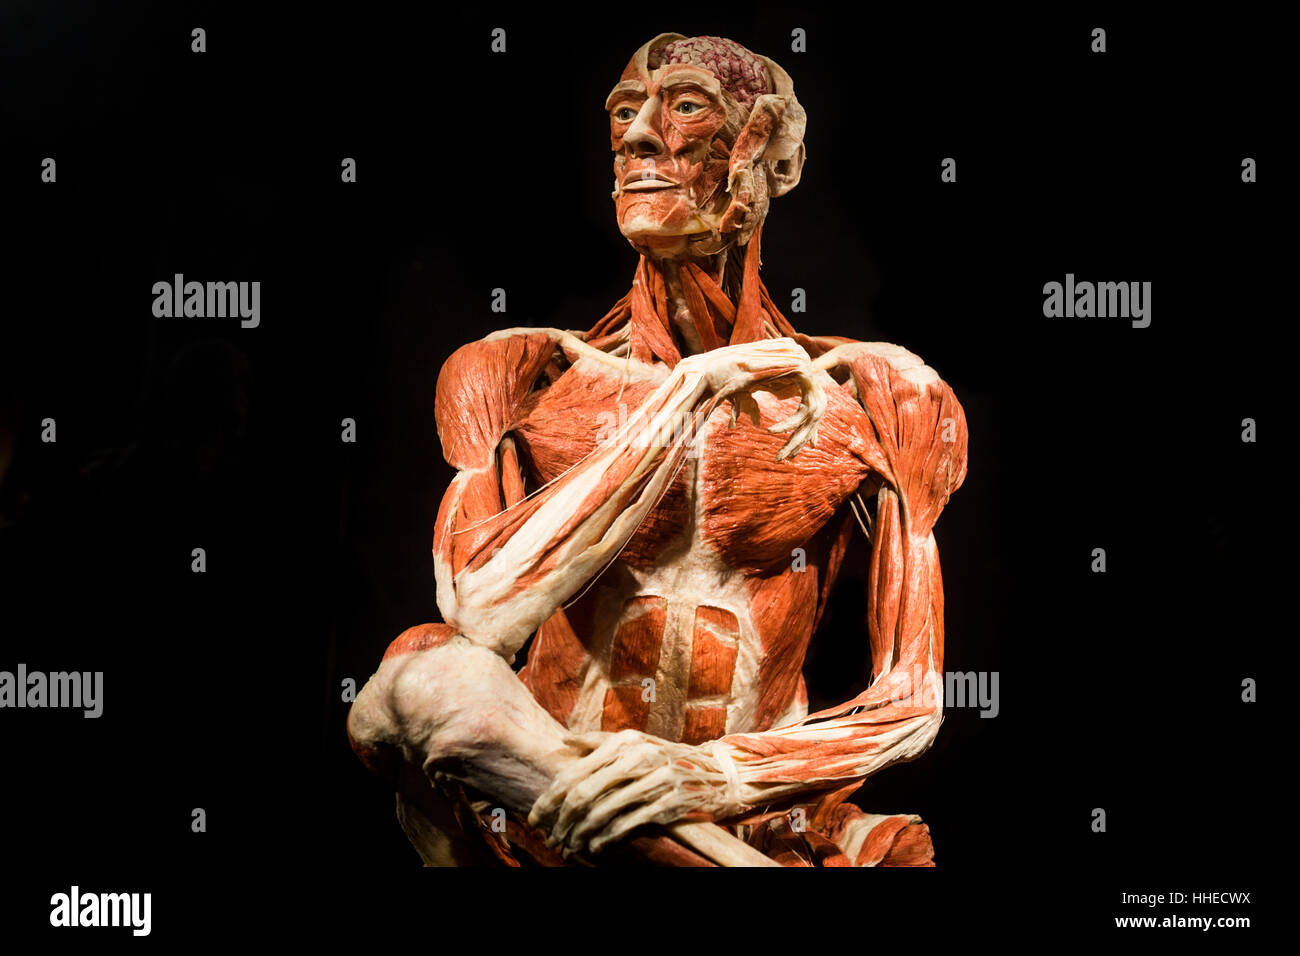 The Thinker at a Body World exhibition in Berlin, Germany Stock Photo